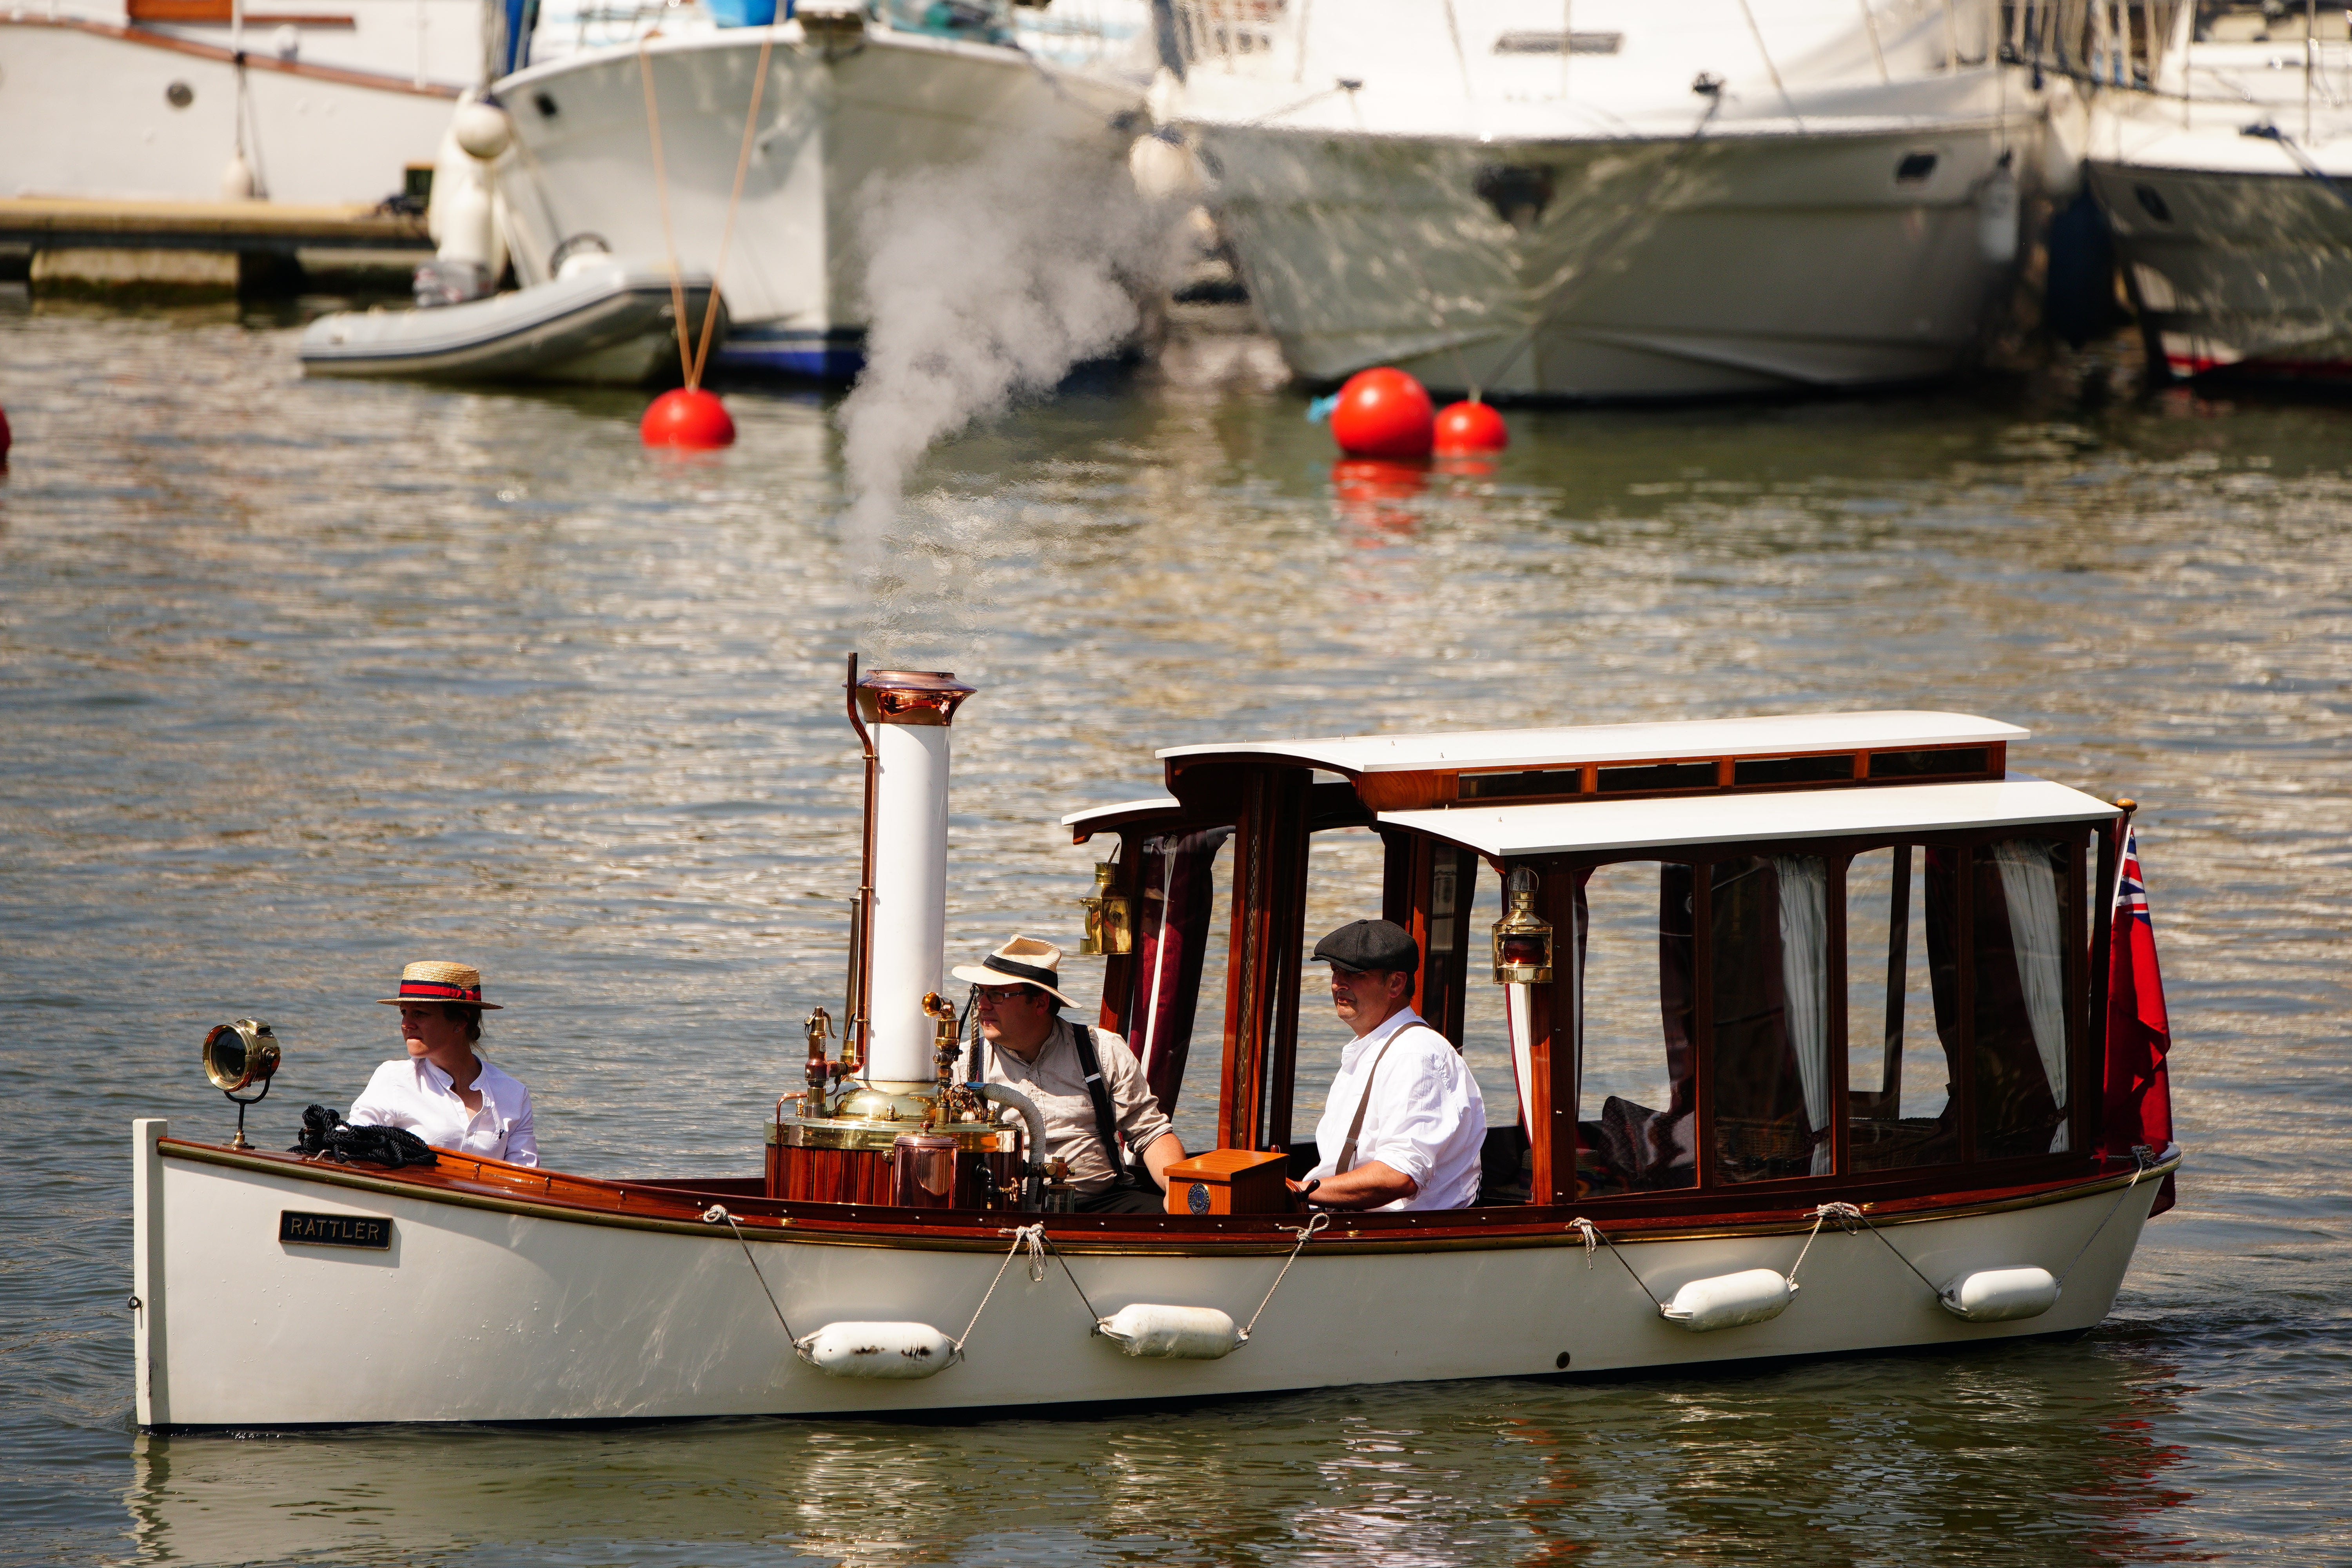 Three men take charge of a steam-powered boat as part of the Bristol Harbour Festival (Ben Birchall/PA)